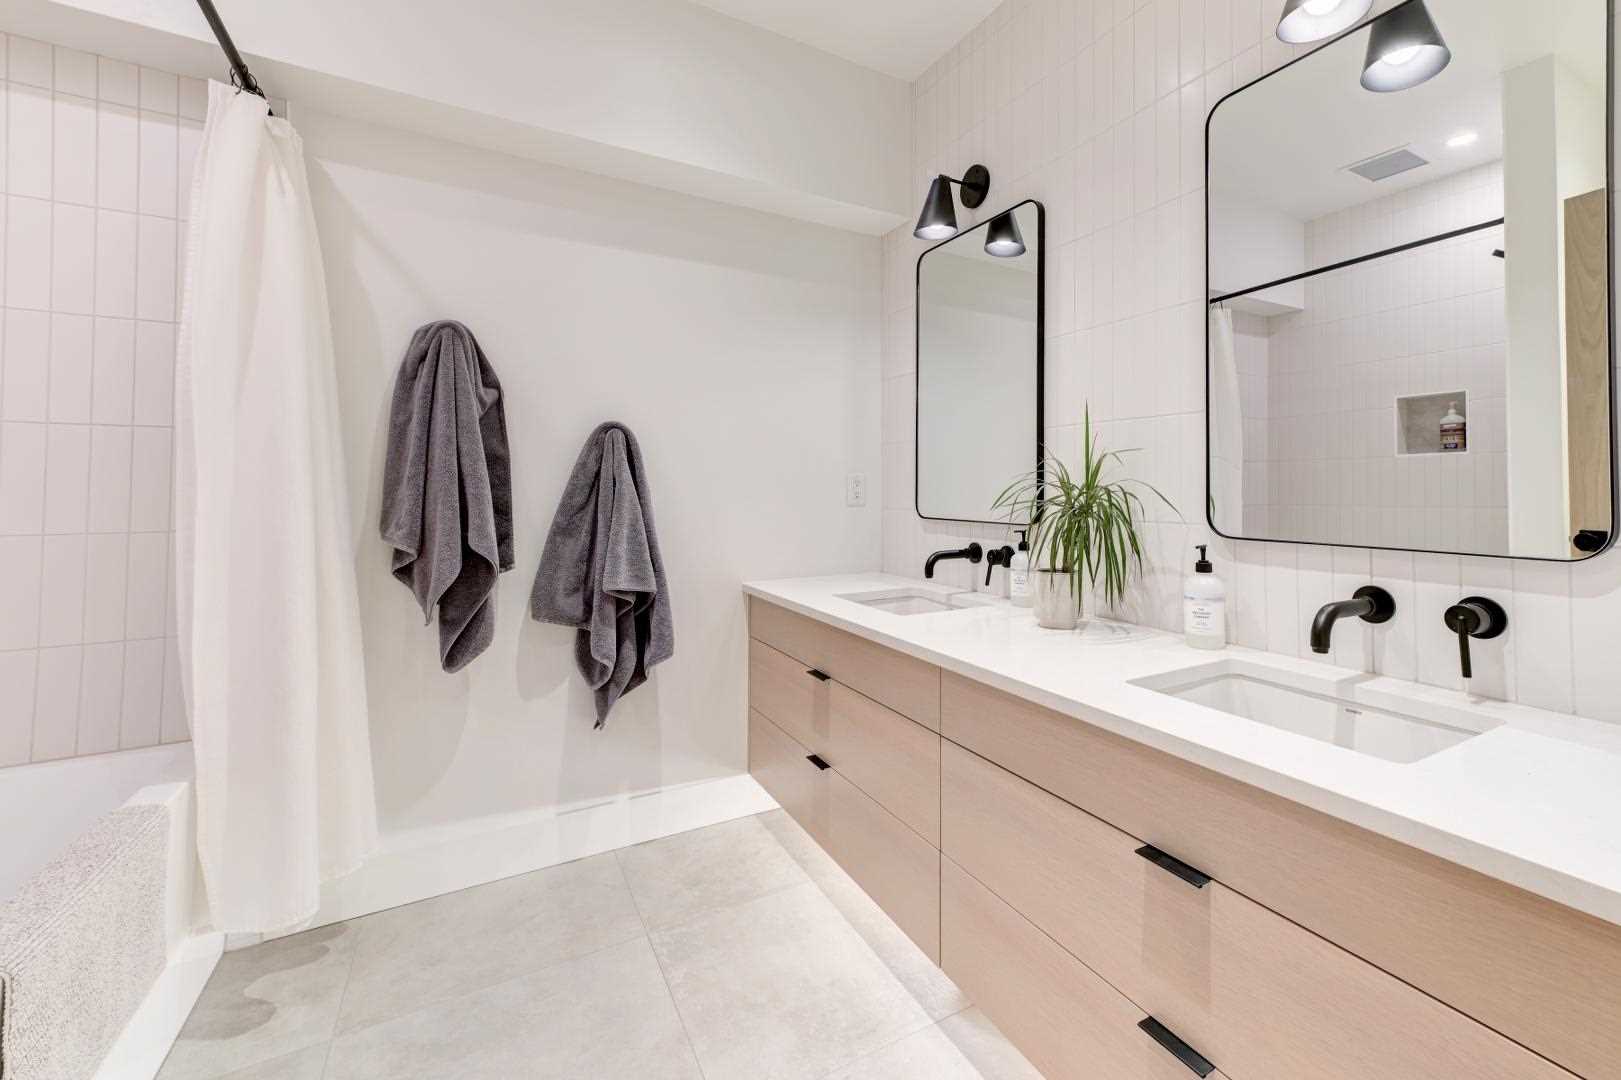 This modern bathroom includes a double vanity, while the black framed mirrors complement the black faucets, lighting, drawer pulls, and shower curtain rod.